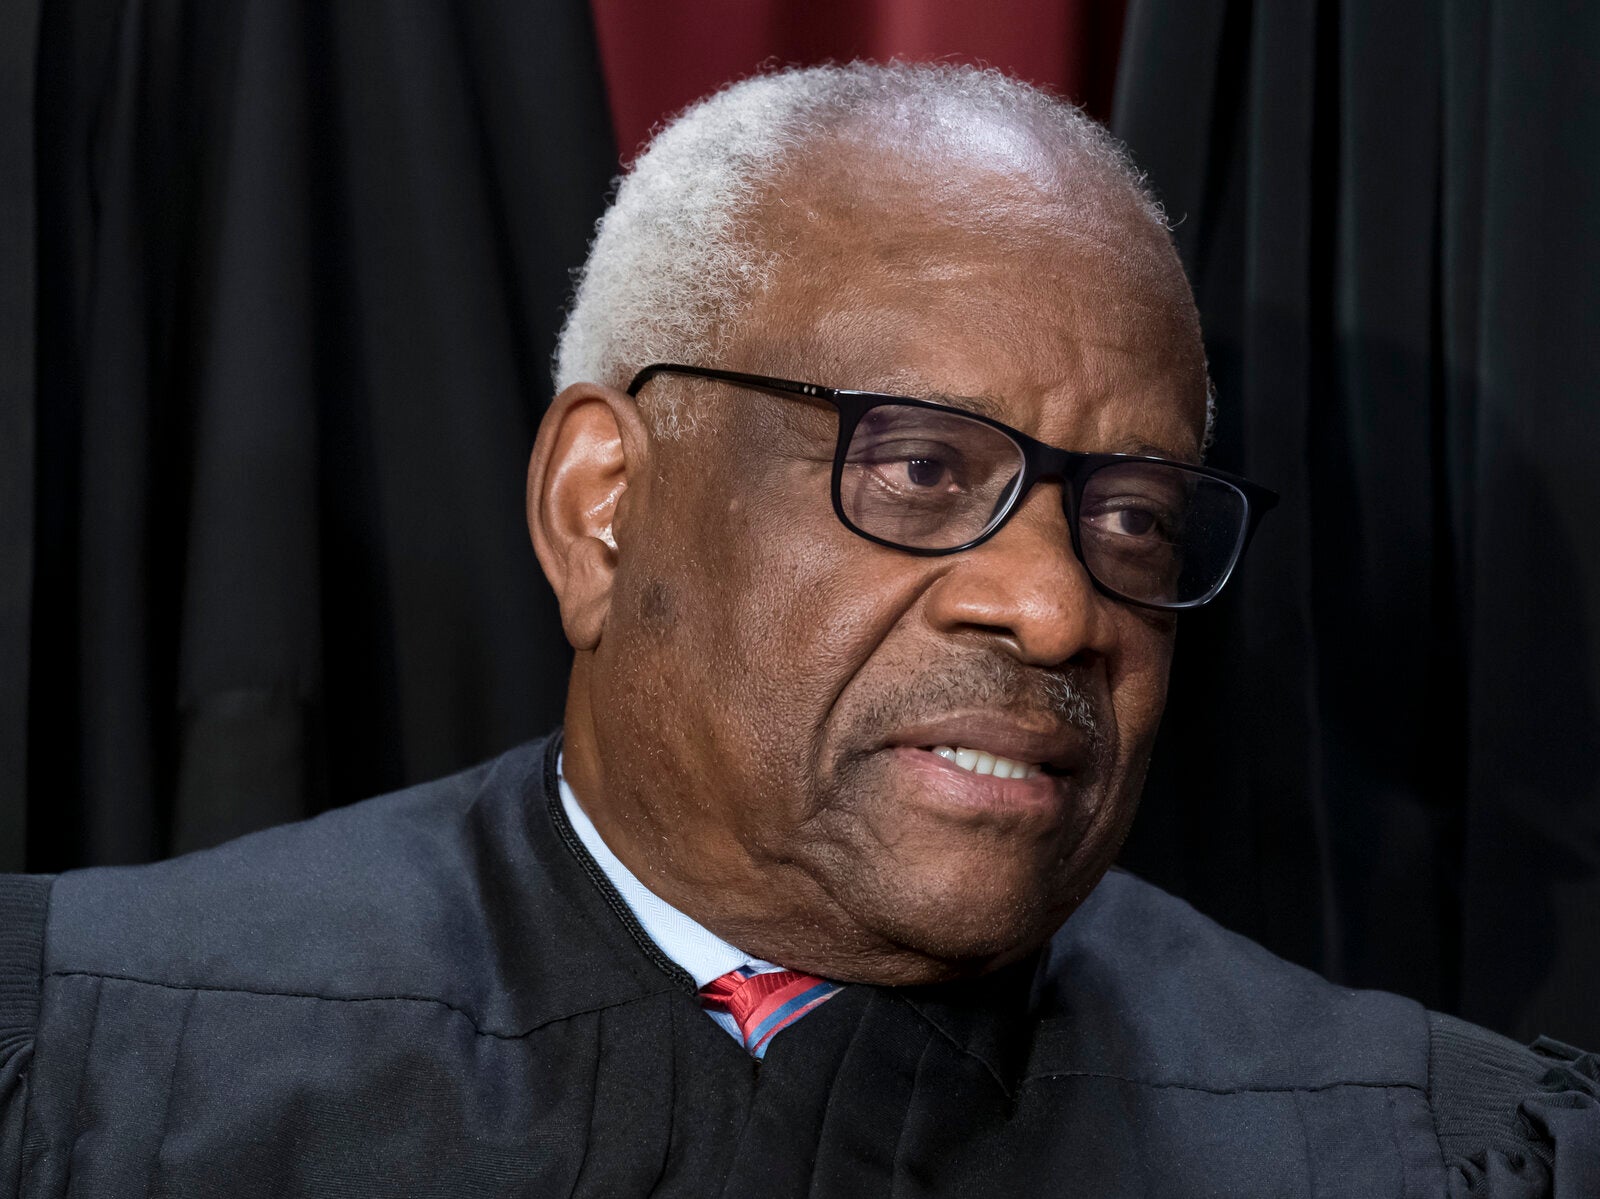 Associate Justice Clarence Thomas joins other members of the Supreme Court as they pose for a group portrait on Oct. 7, 2022